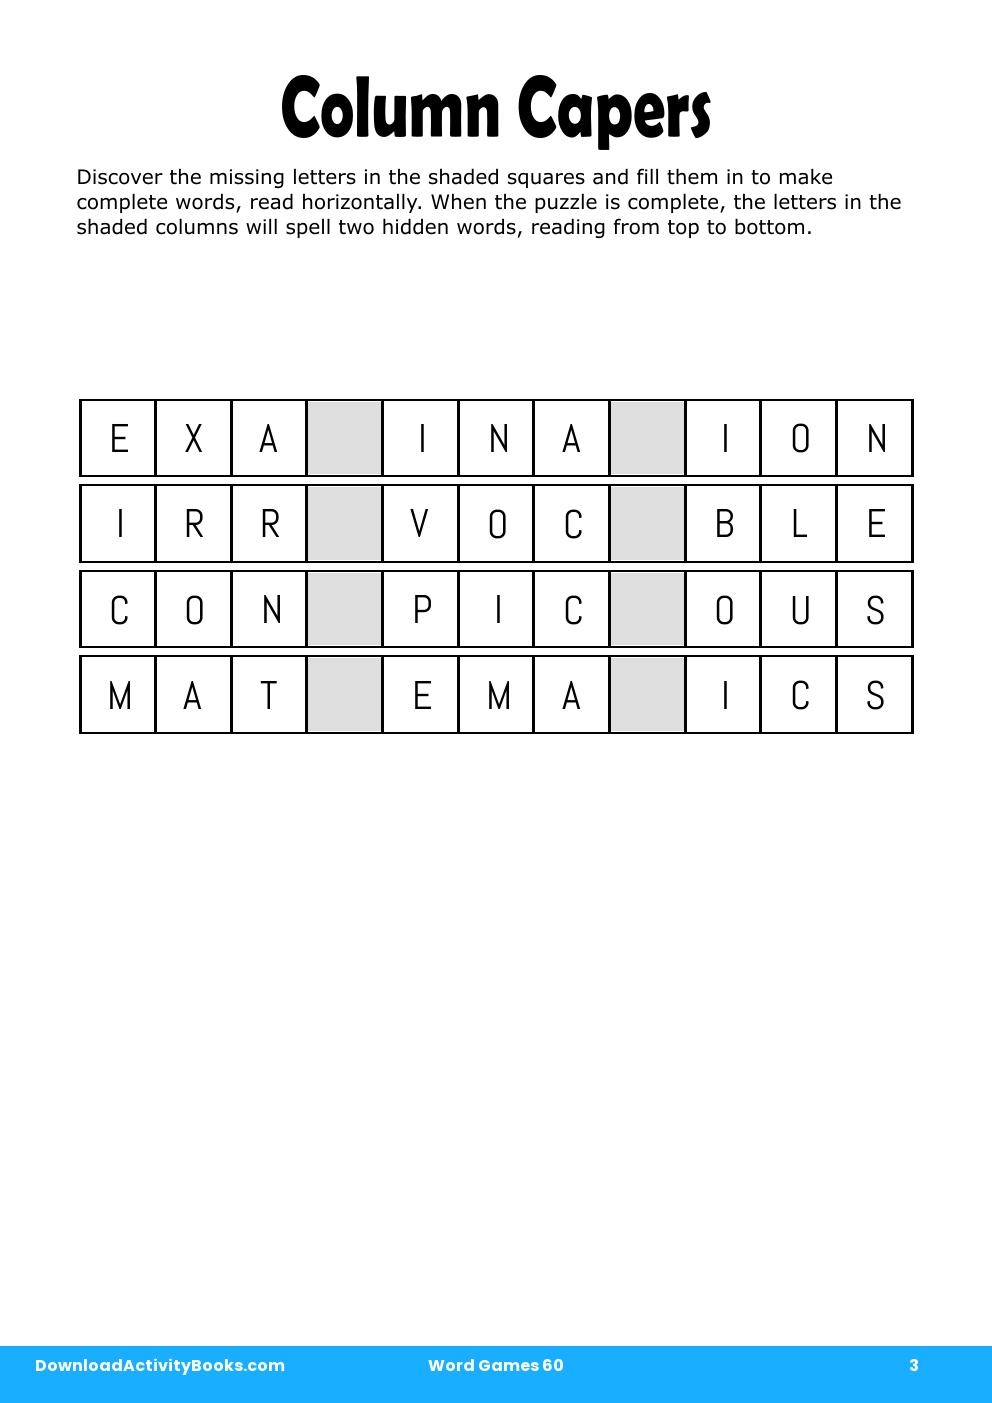 Column Capers in Word Games 60